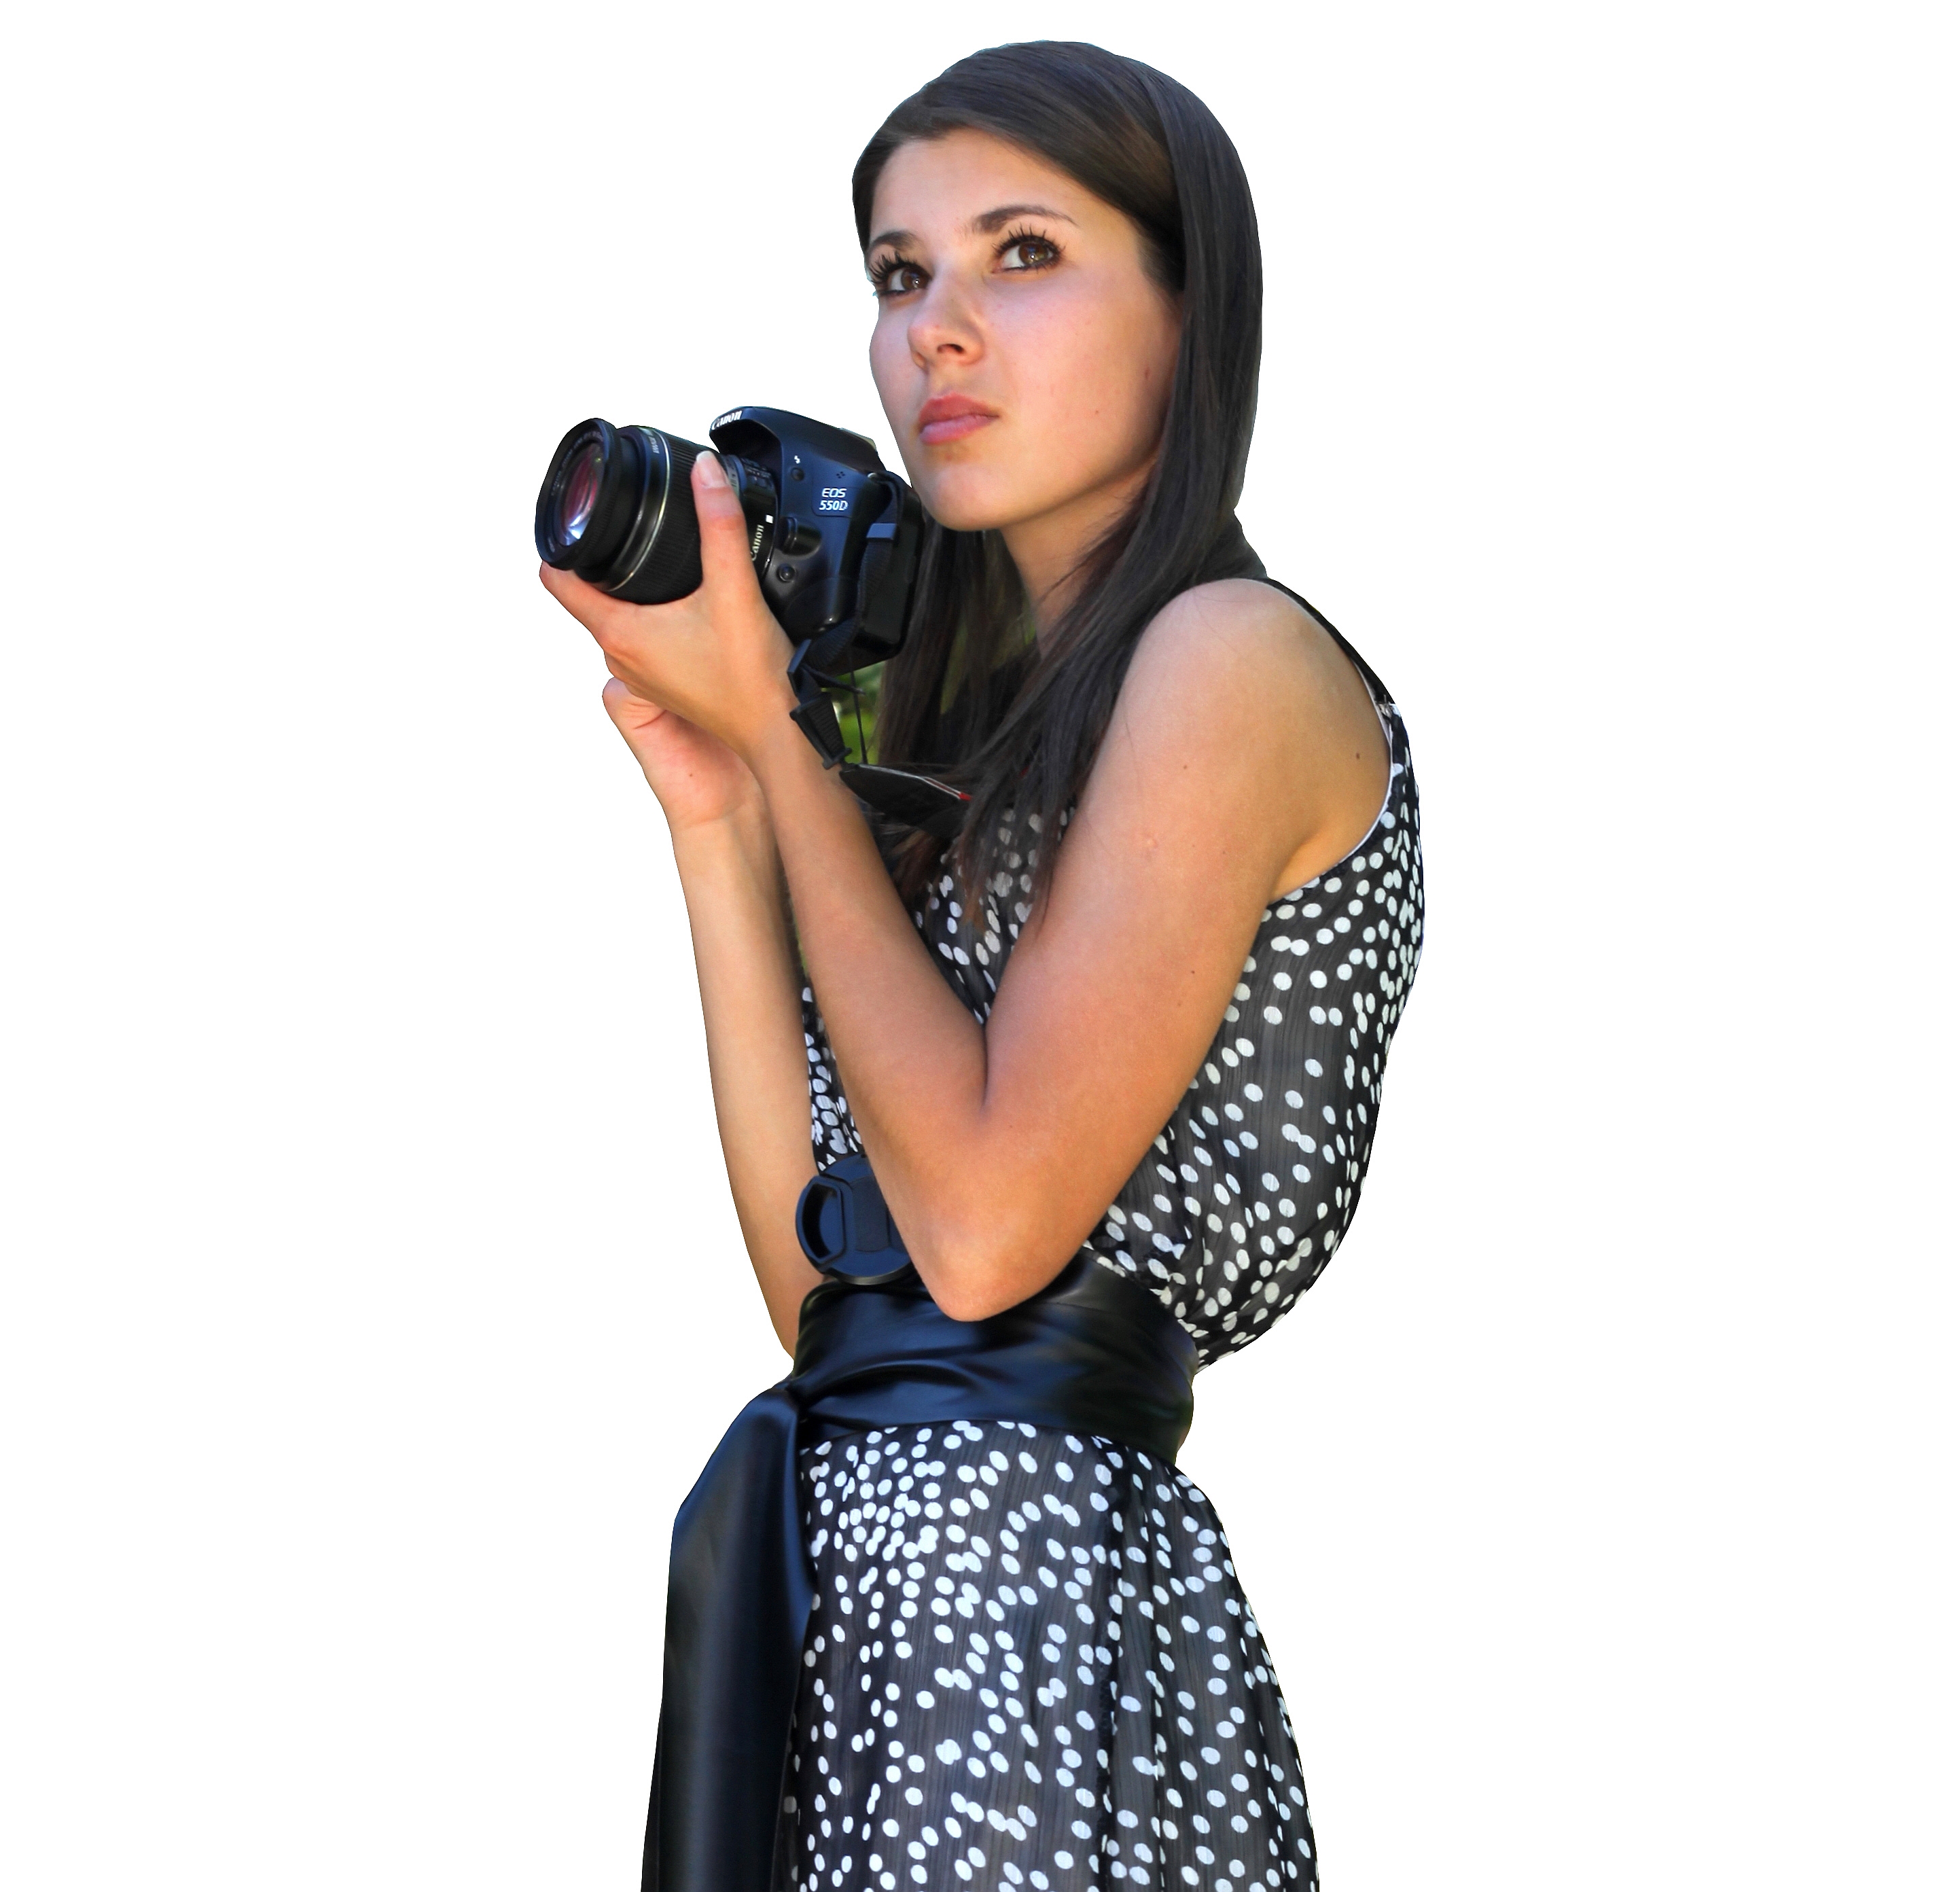 a marvelously beautiful Catholic girl holding a Canon DSLR camera in June 2013, cropped version